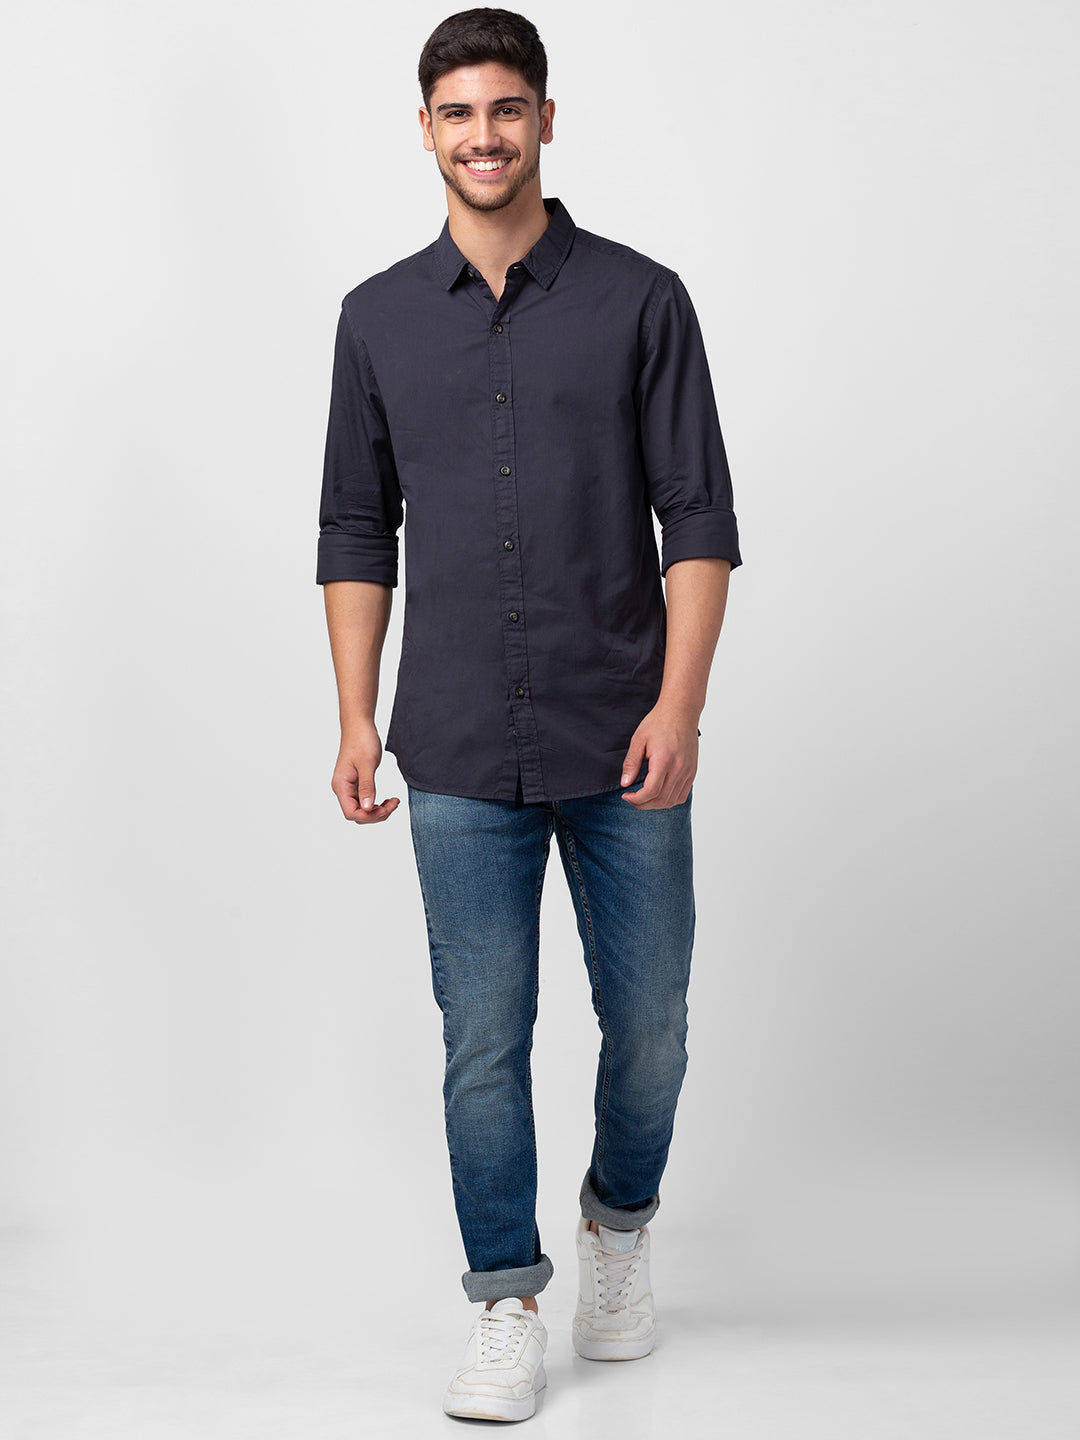 Fashion and Fashion Men Solid Casual Grey Shirt - Buy Fashion and Fashion  Men Solid Casual Grey Shirt Online at Best Prices in India | Flipkart.com